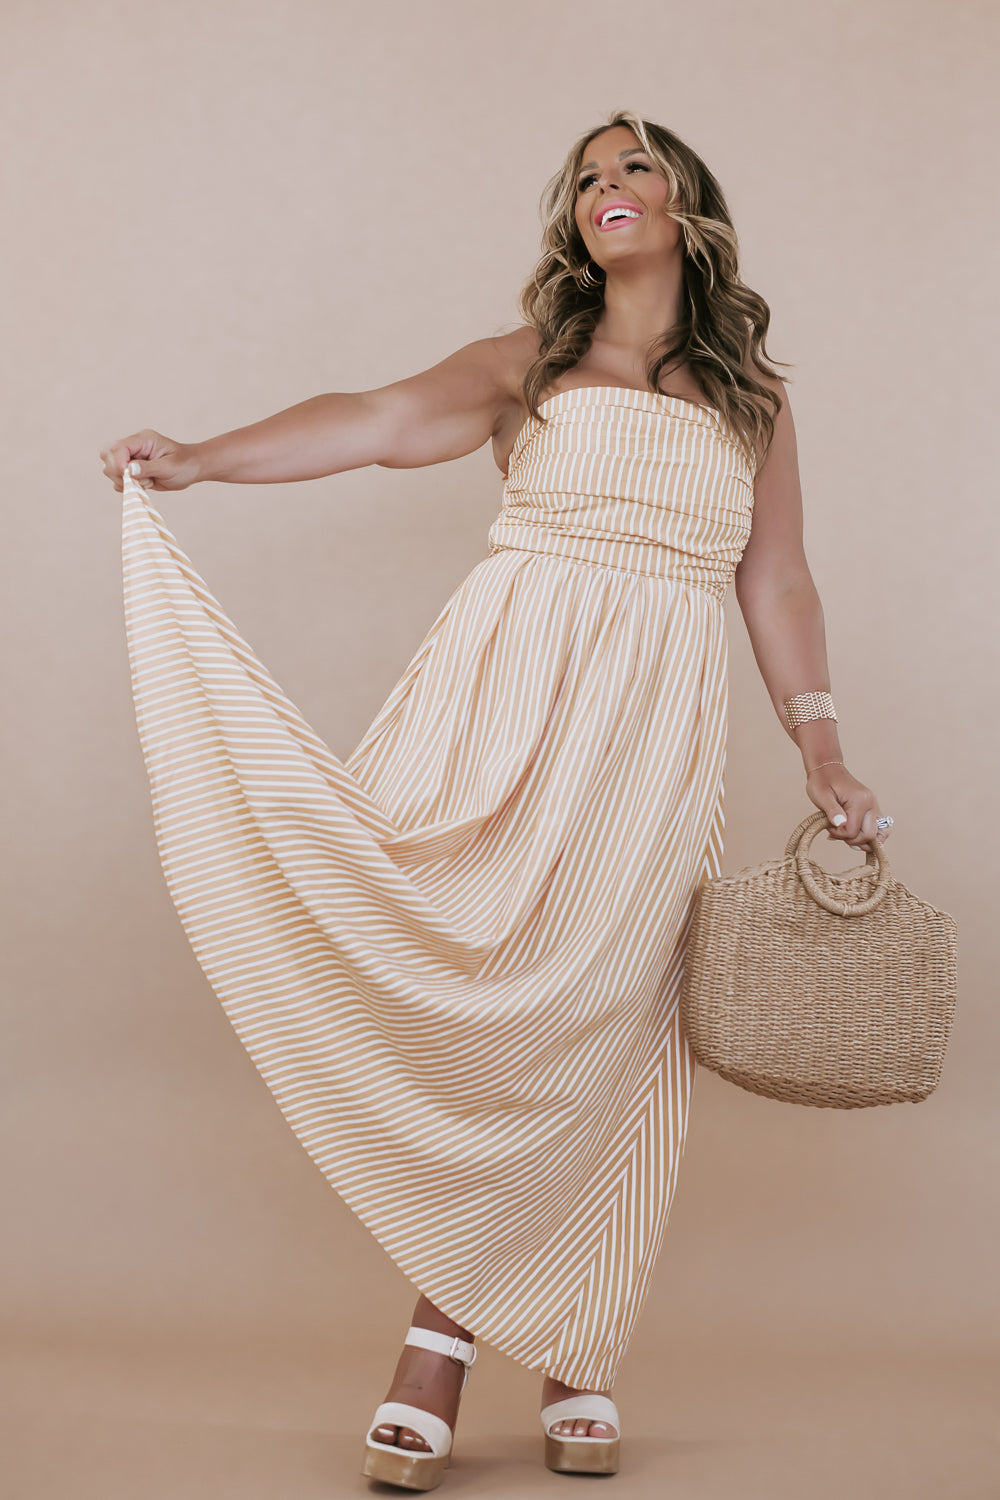 BY TOGETHER: Strapless Stripe Maxi Dress, Yellow